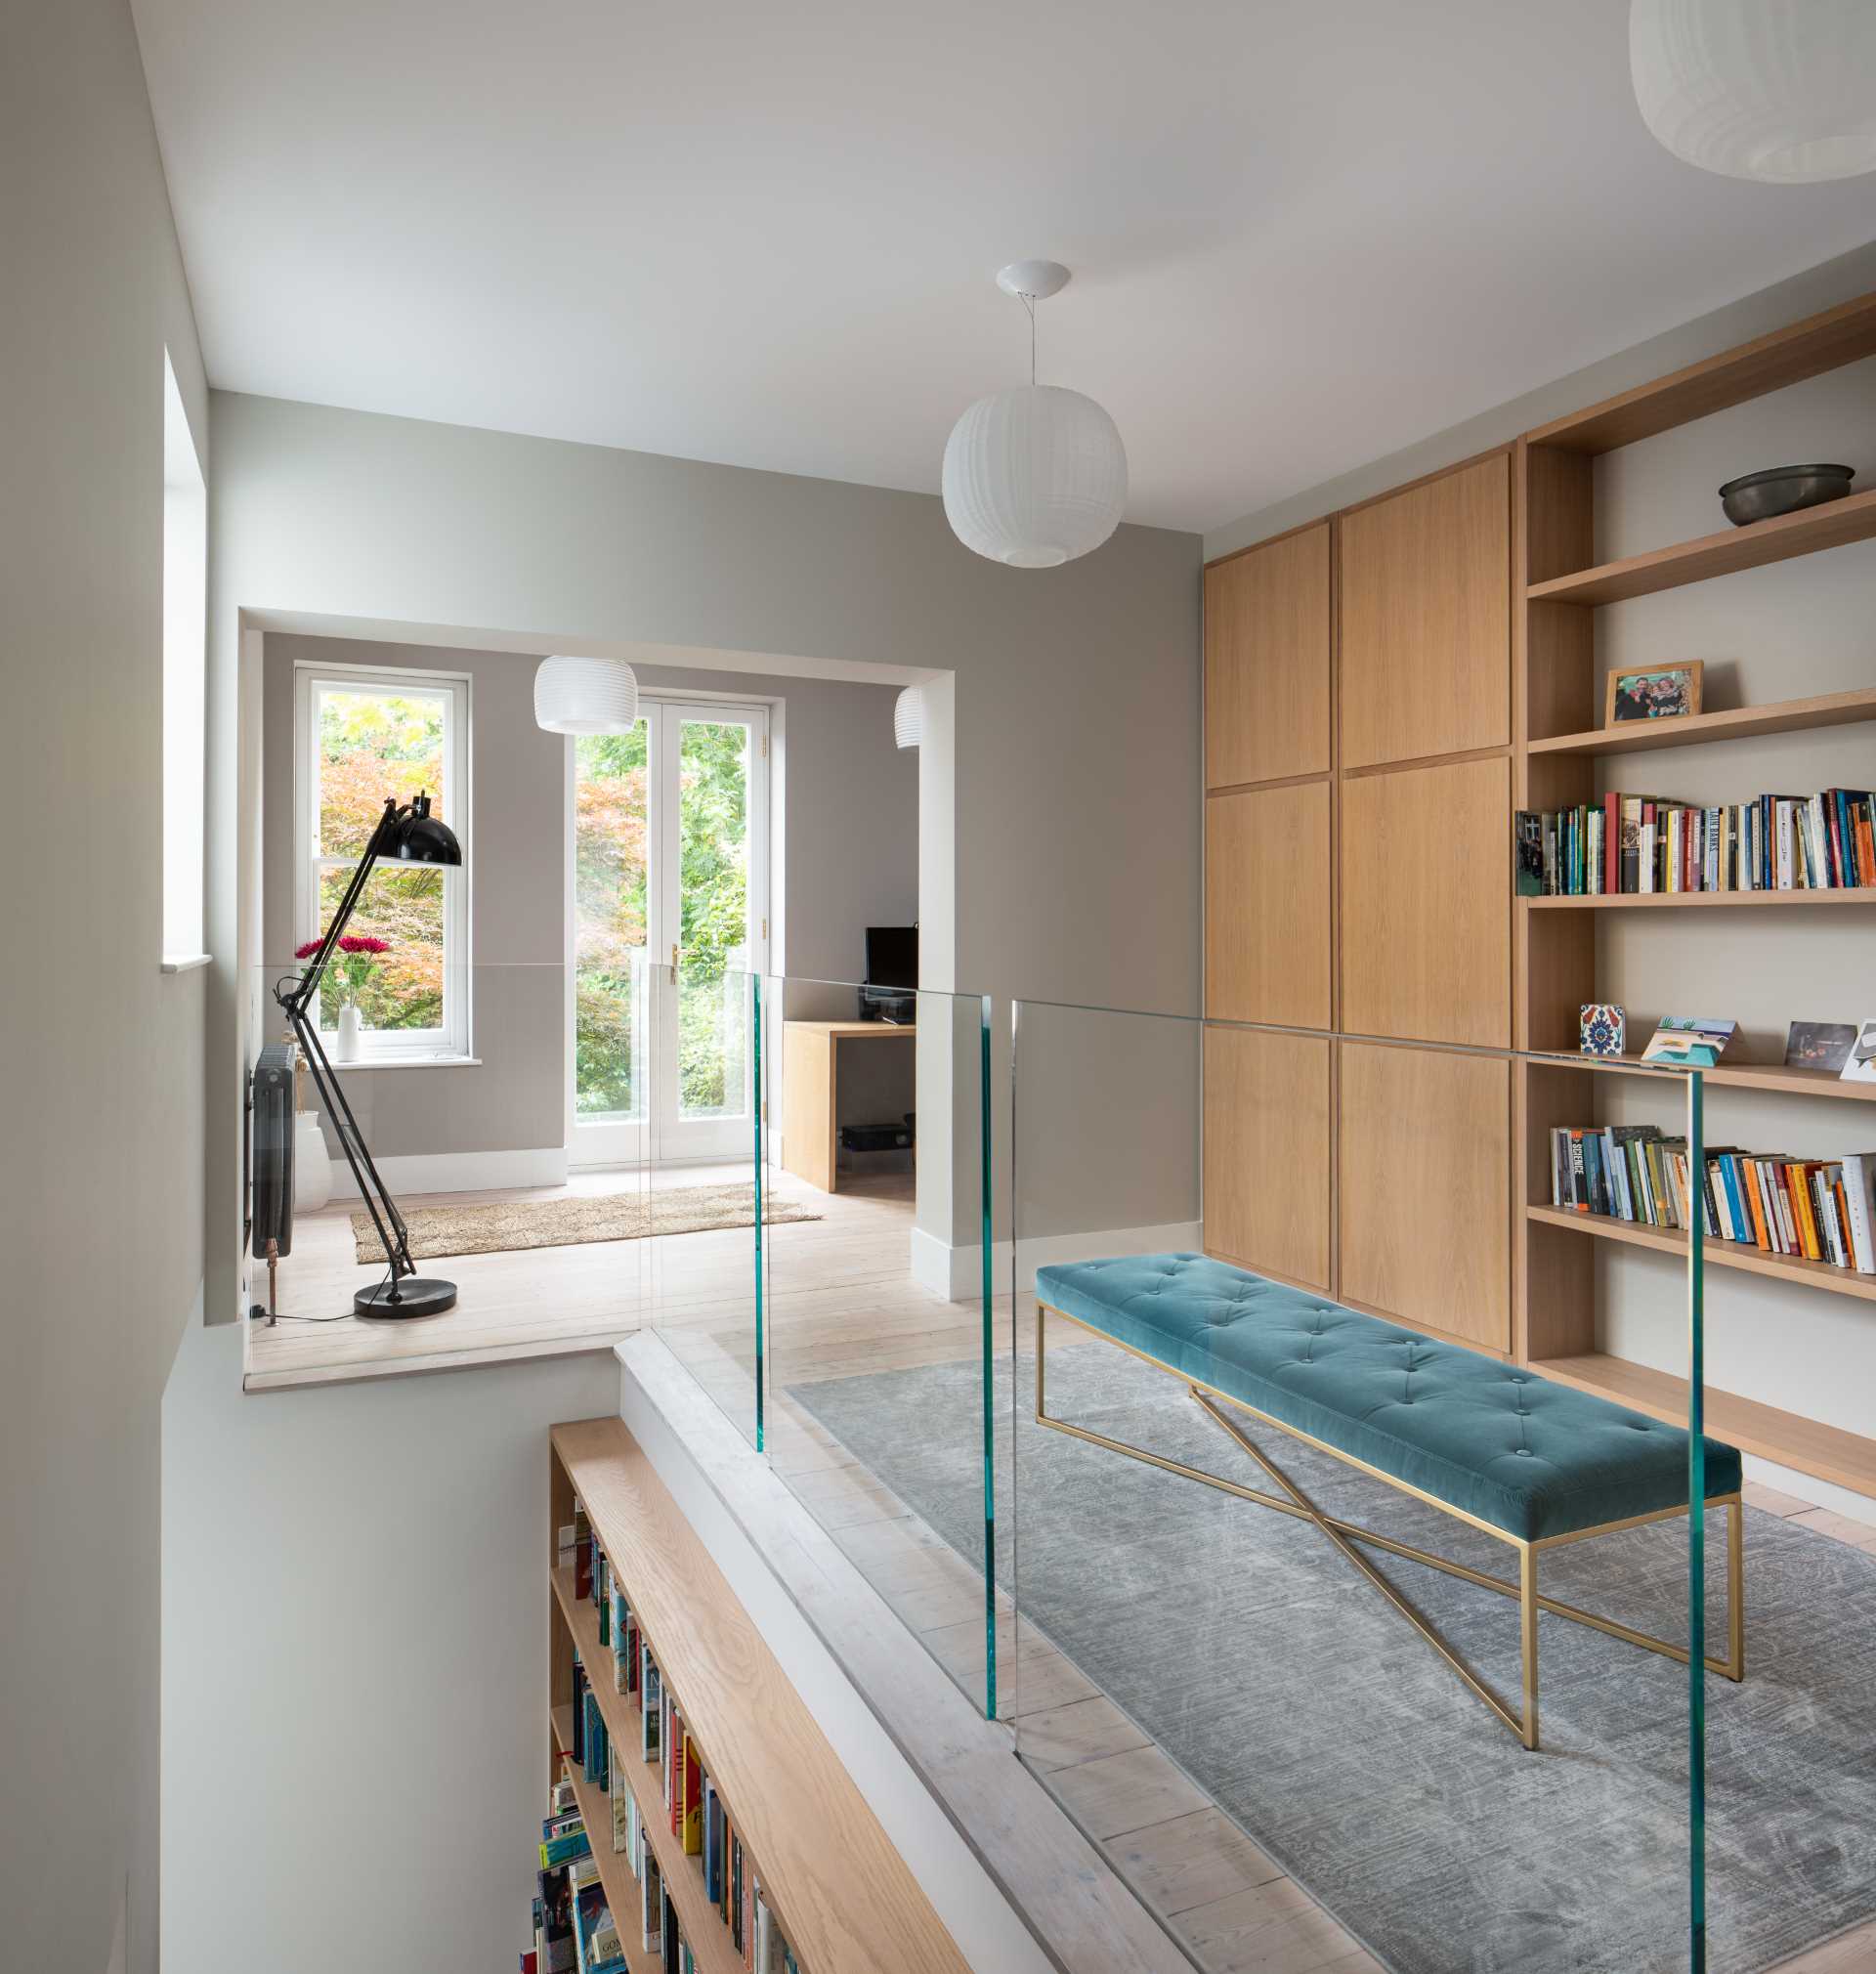 Glass railings allow the natural light to pass throughout this interior.